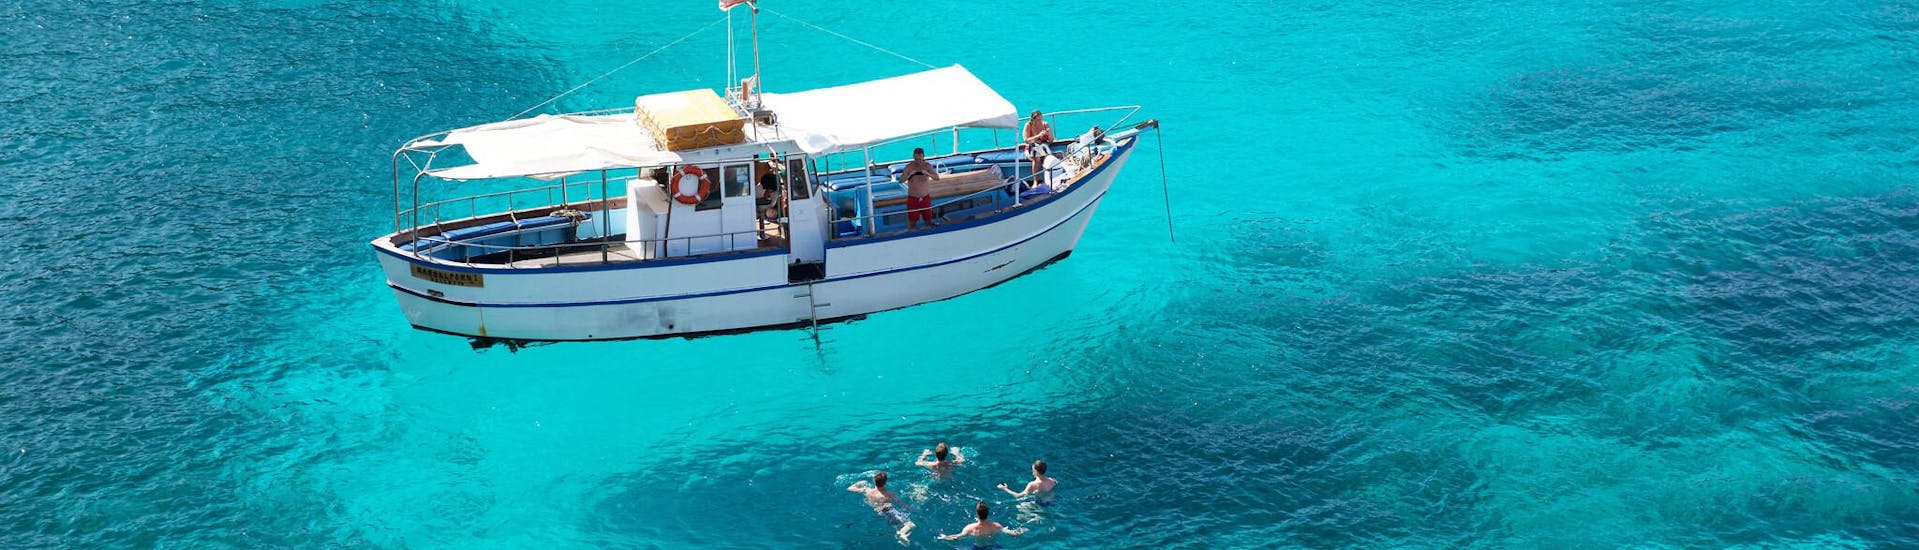 People having fun in a lagoon during a stop in their boat trip.